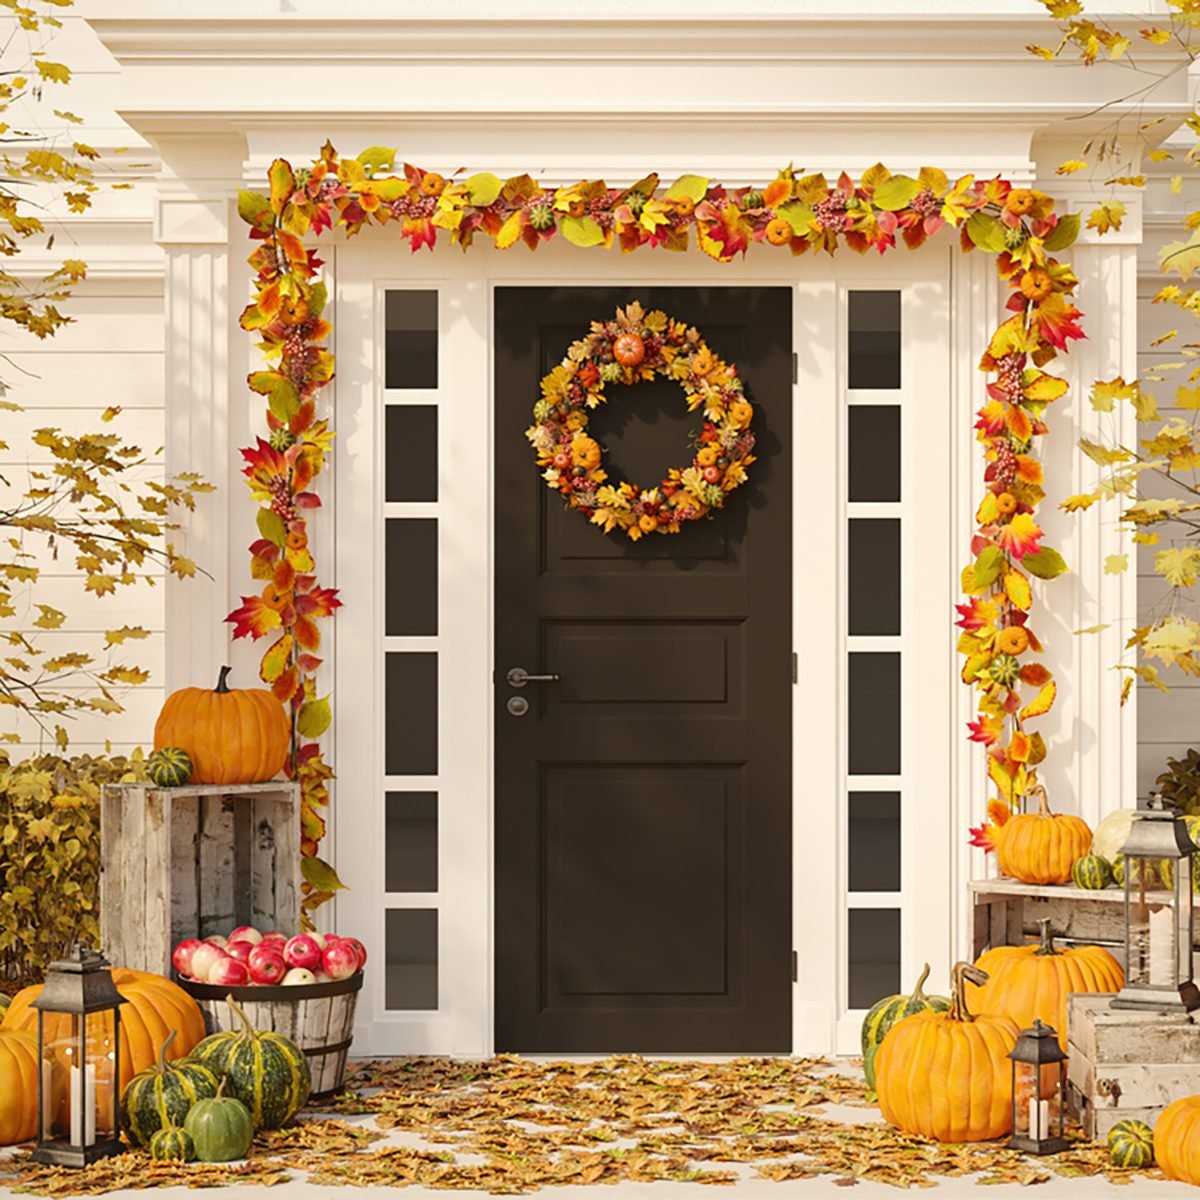 Thanksgiving Decorations - Photos All Recommendation